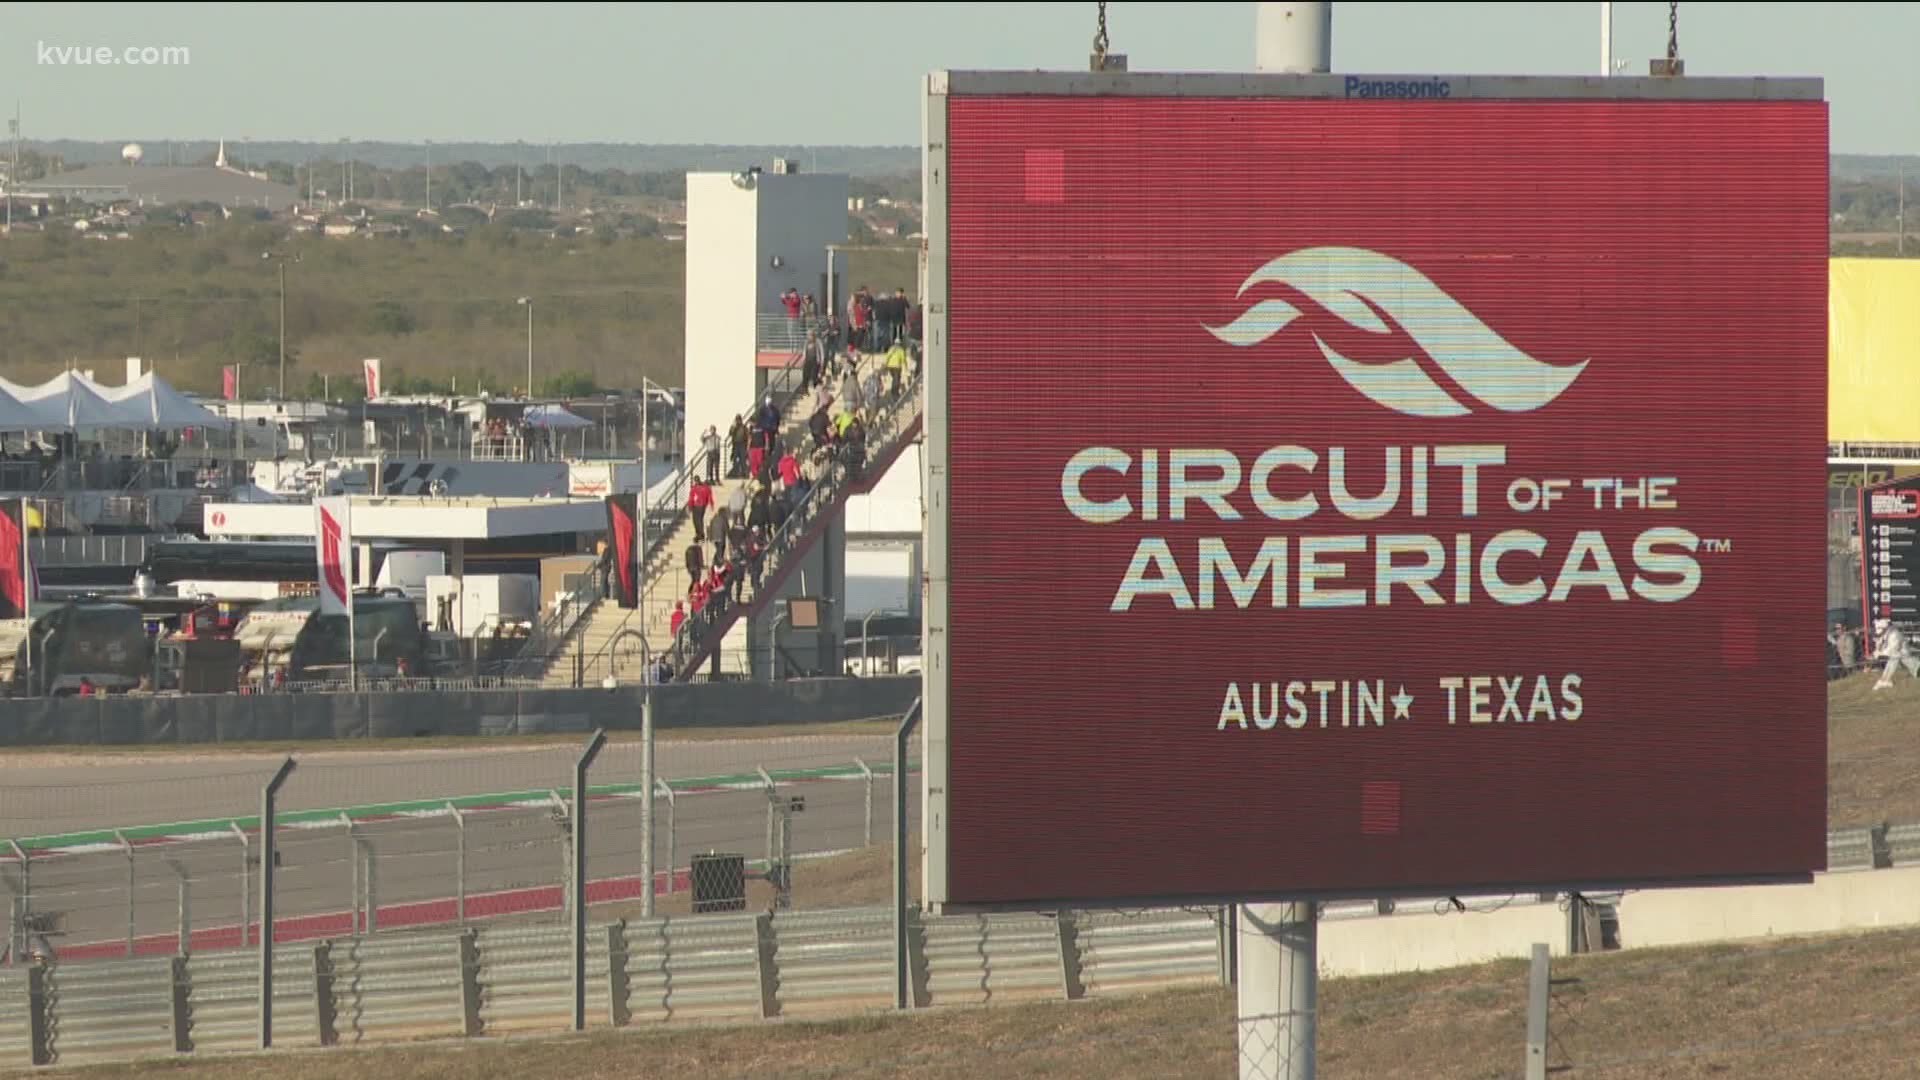 The F1 U.S. Grand Prix race at Circuit of the Americas joins Austin's growing list of canceled events.